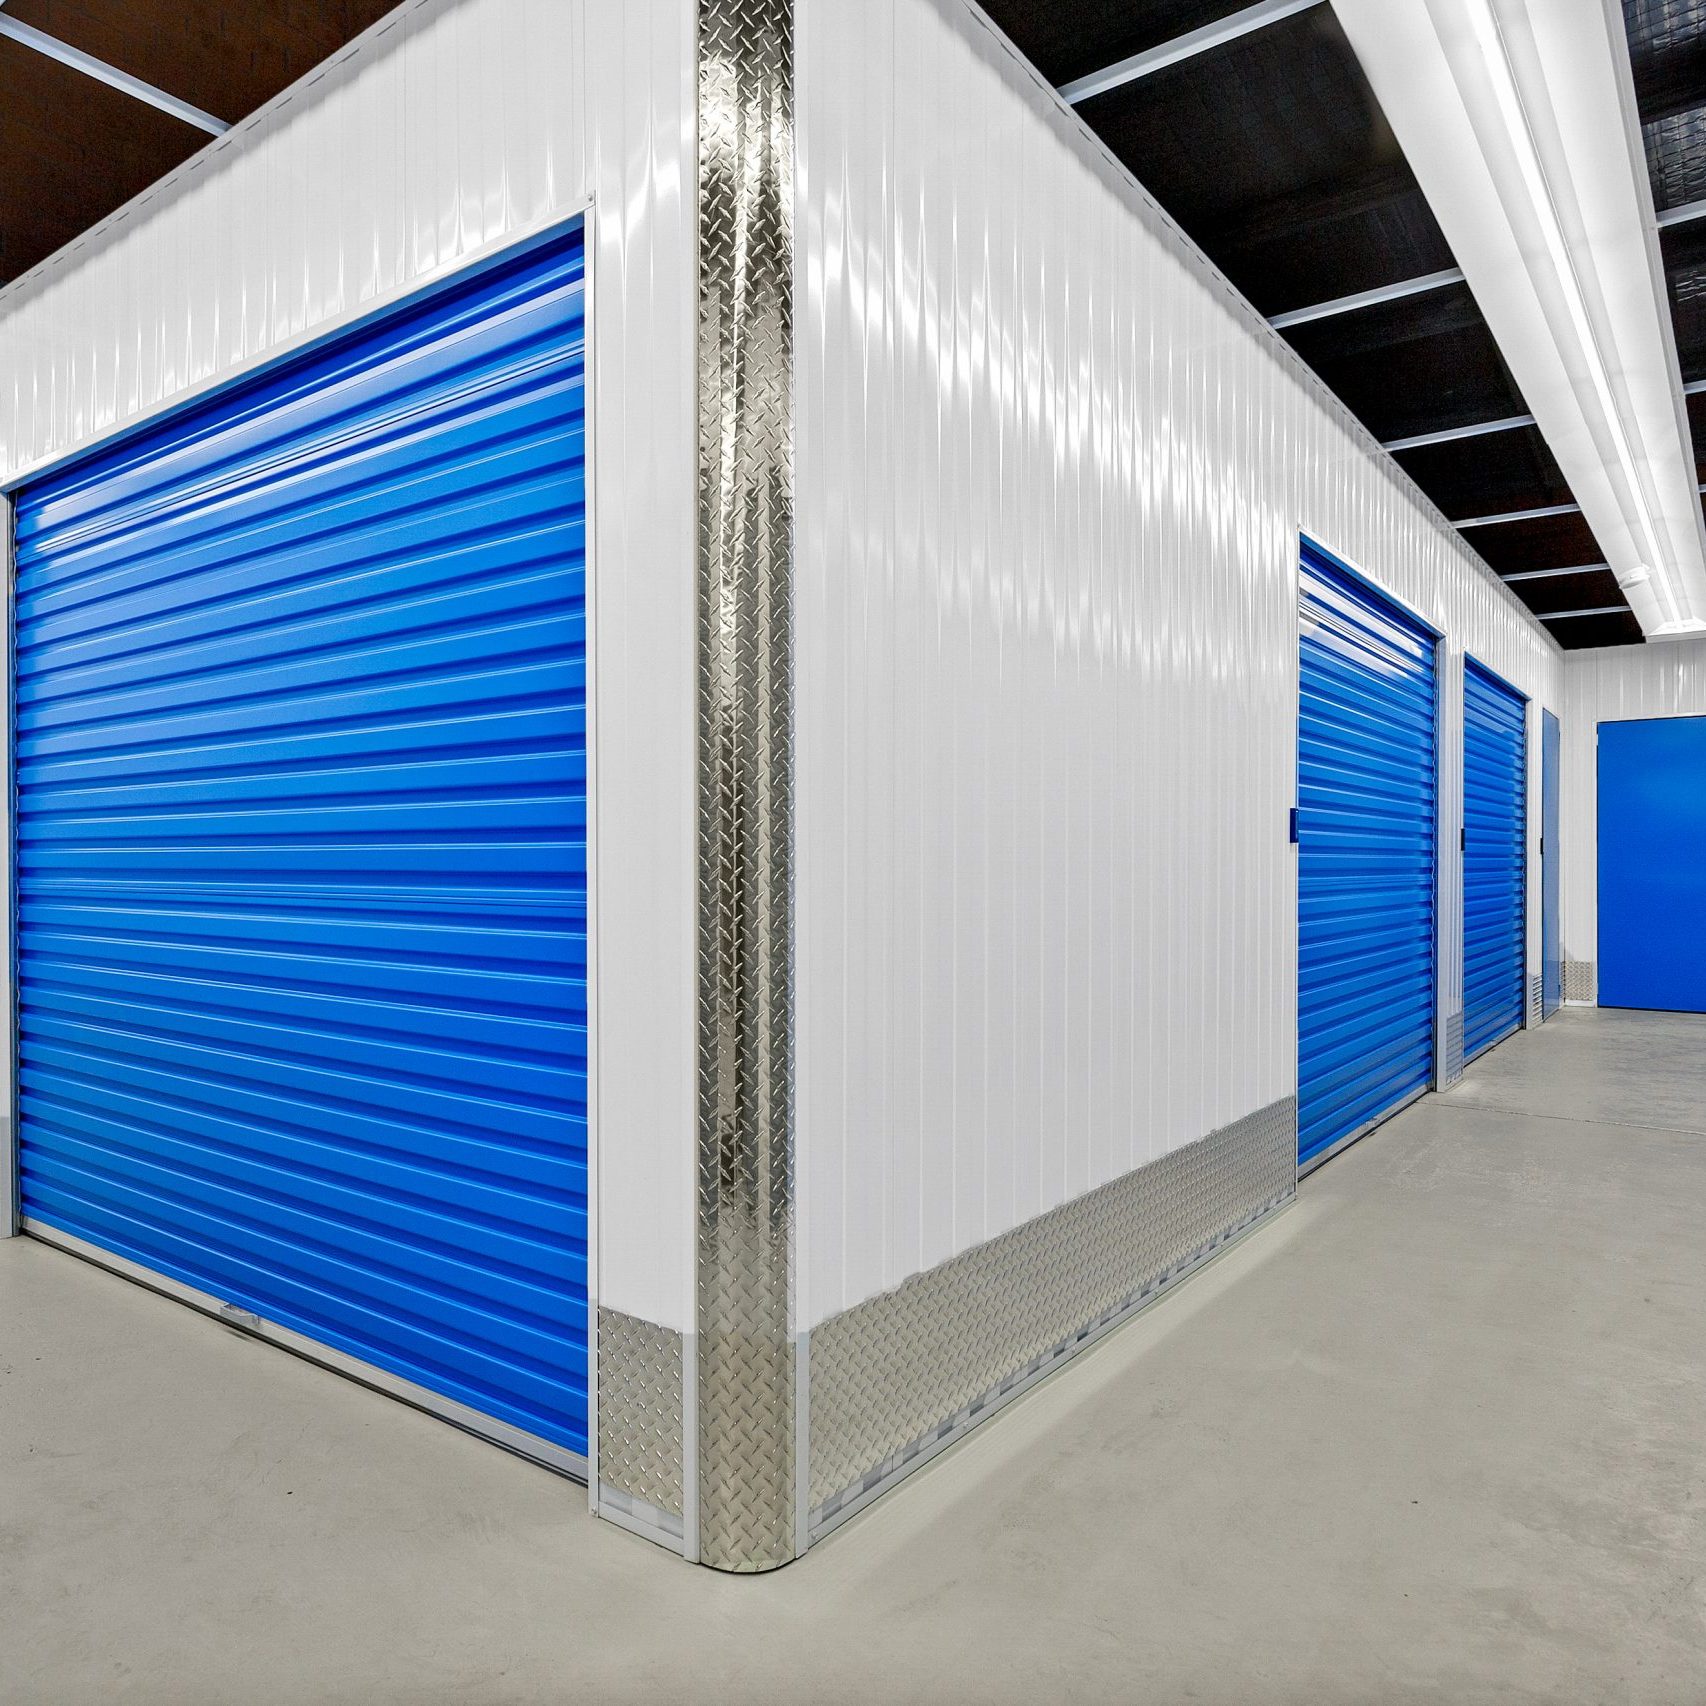 http://A%20storage%20unit%20with%20blue%20doors%20and%20white%20walls.